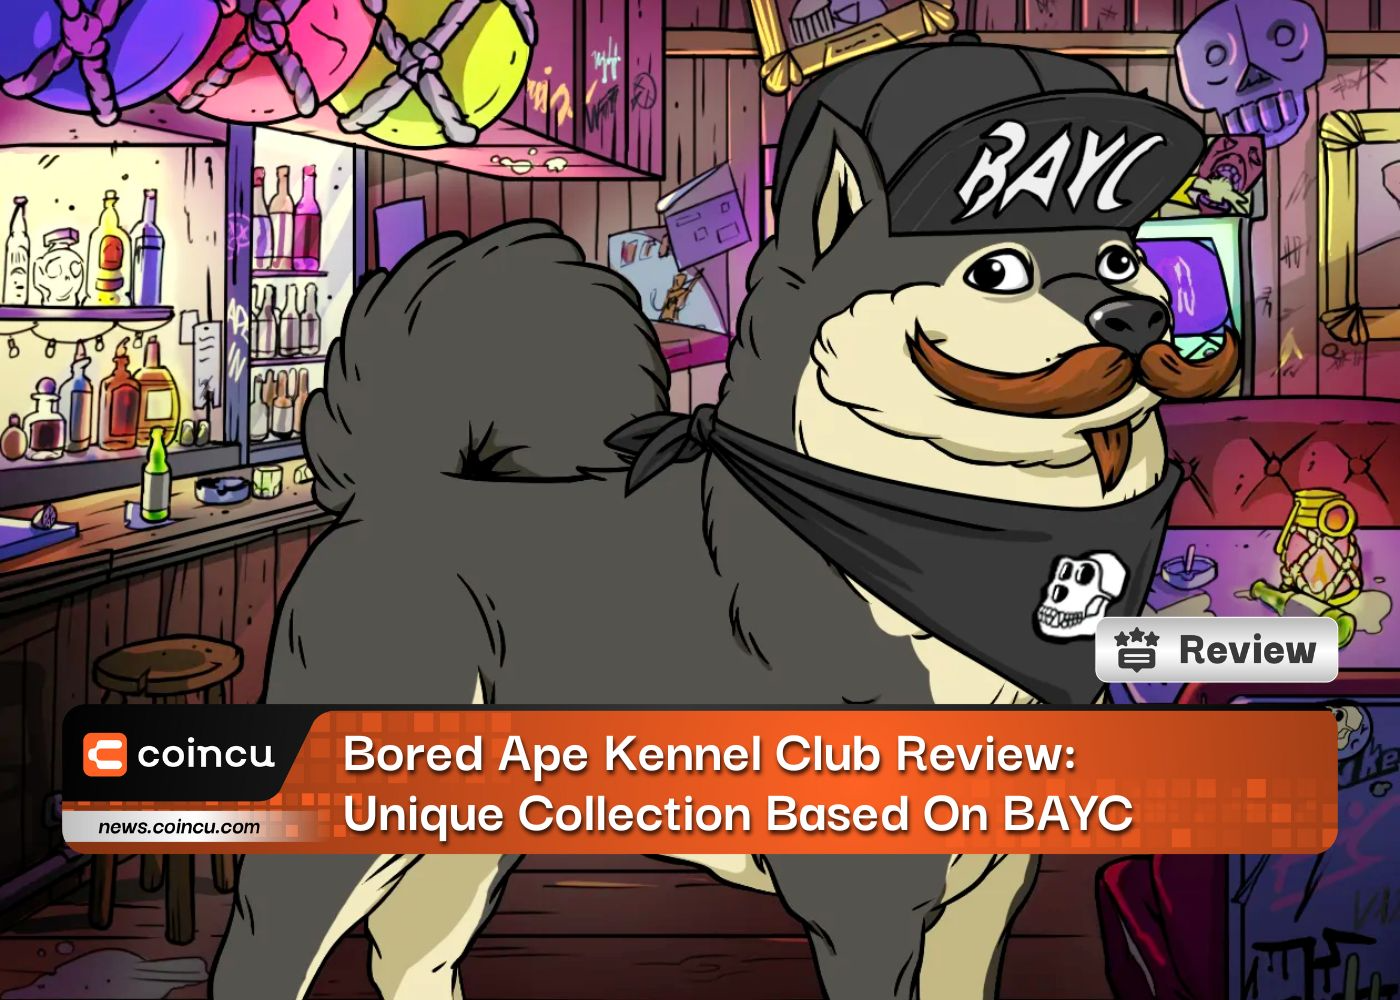 Bored Ape Kennel Club Review: Unique Collection Based On BAYC